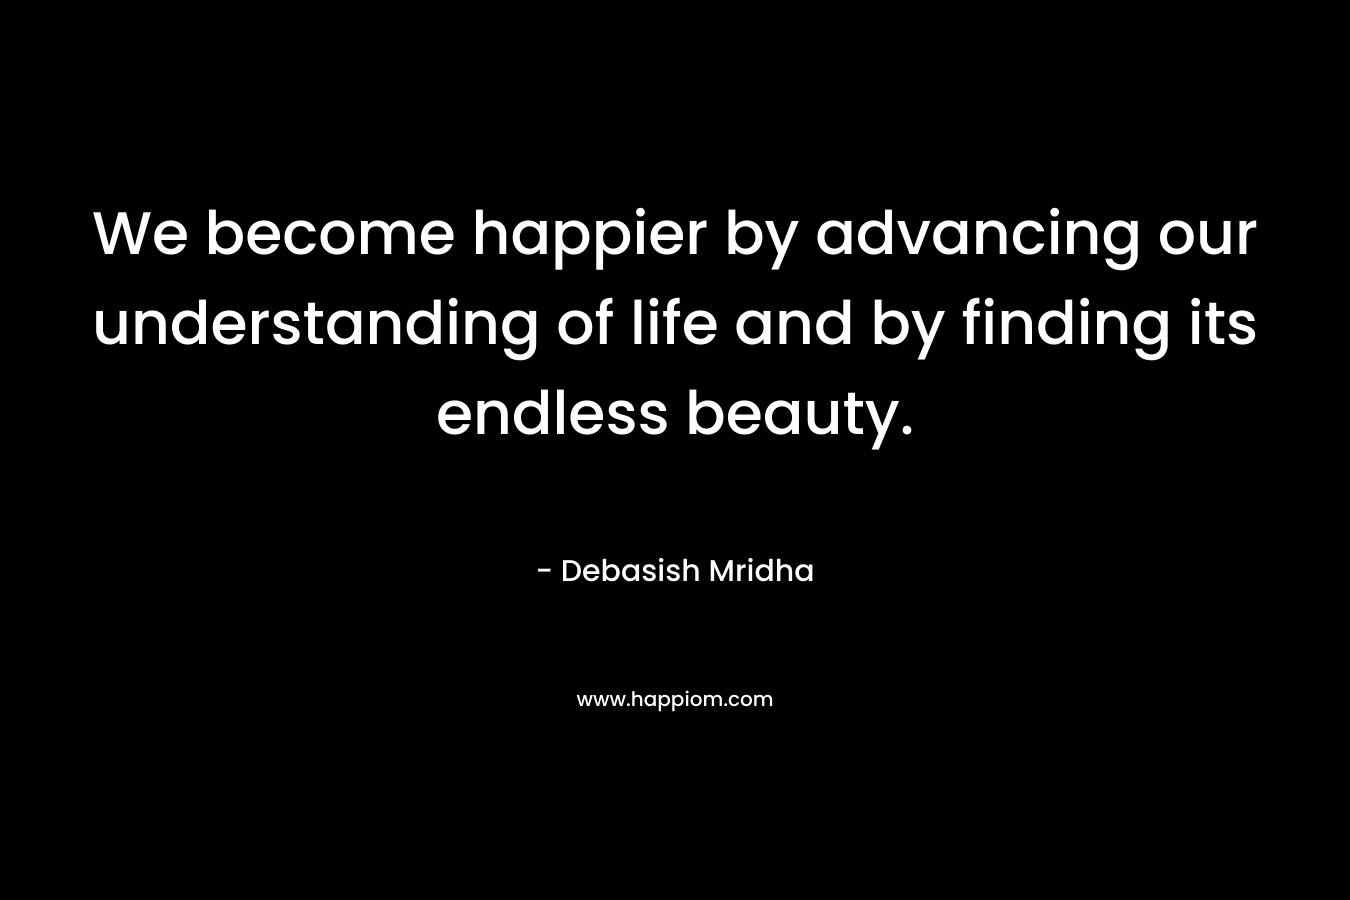 We become happier by advancing our understanding of life and by finding its endless beauty.